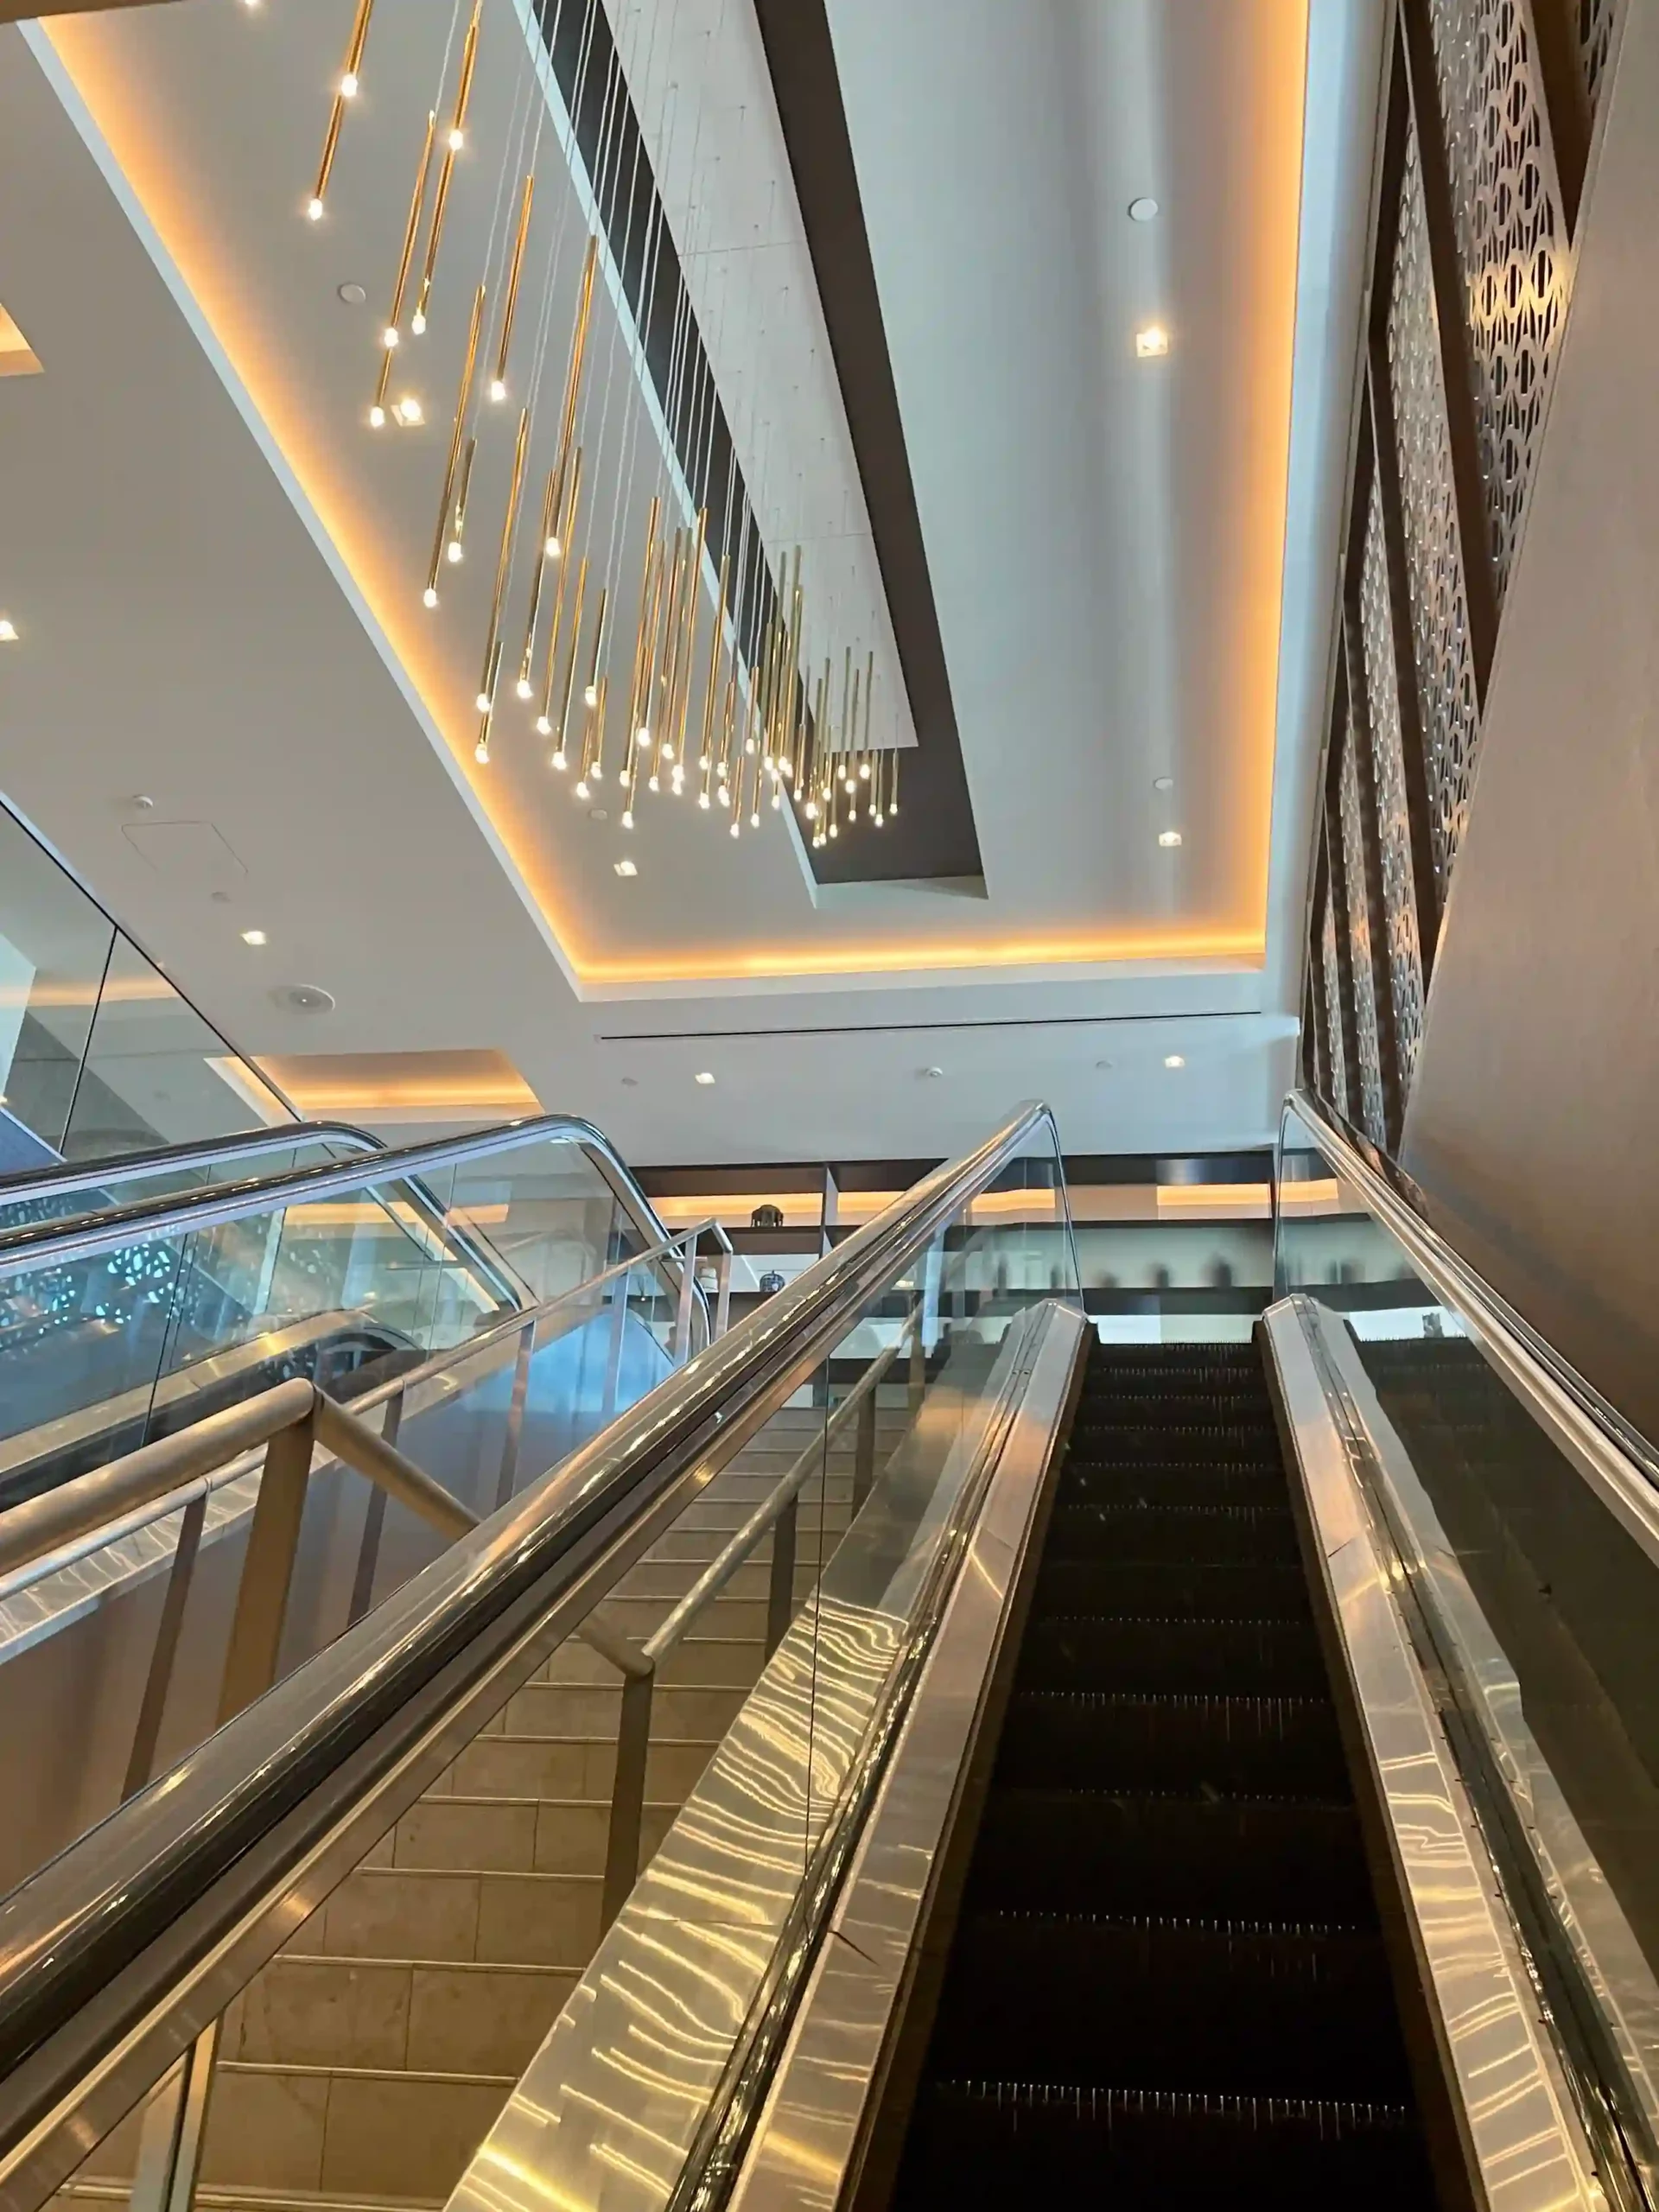 escalators in a building with a chandelier from the ceiling